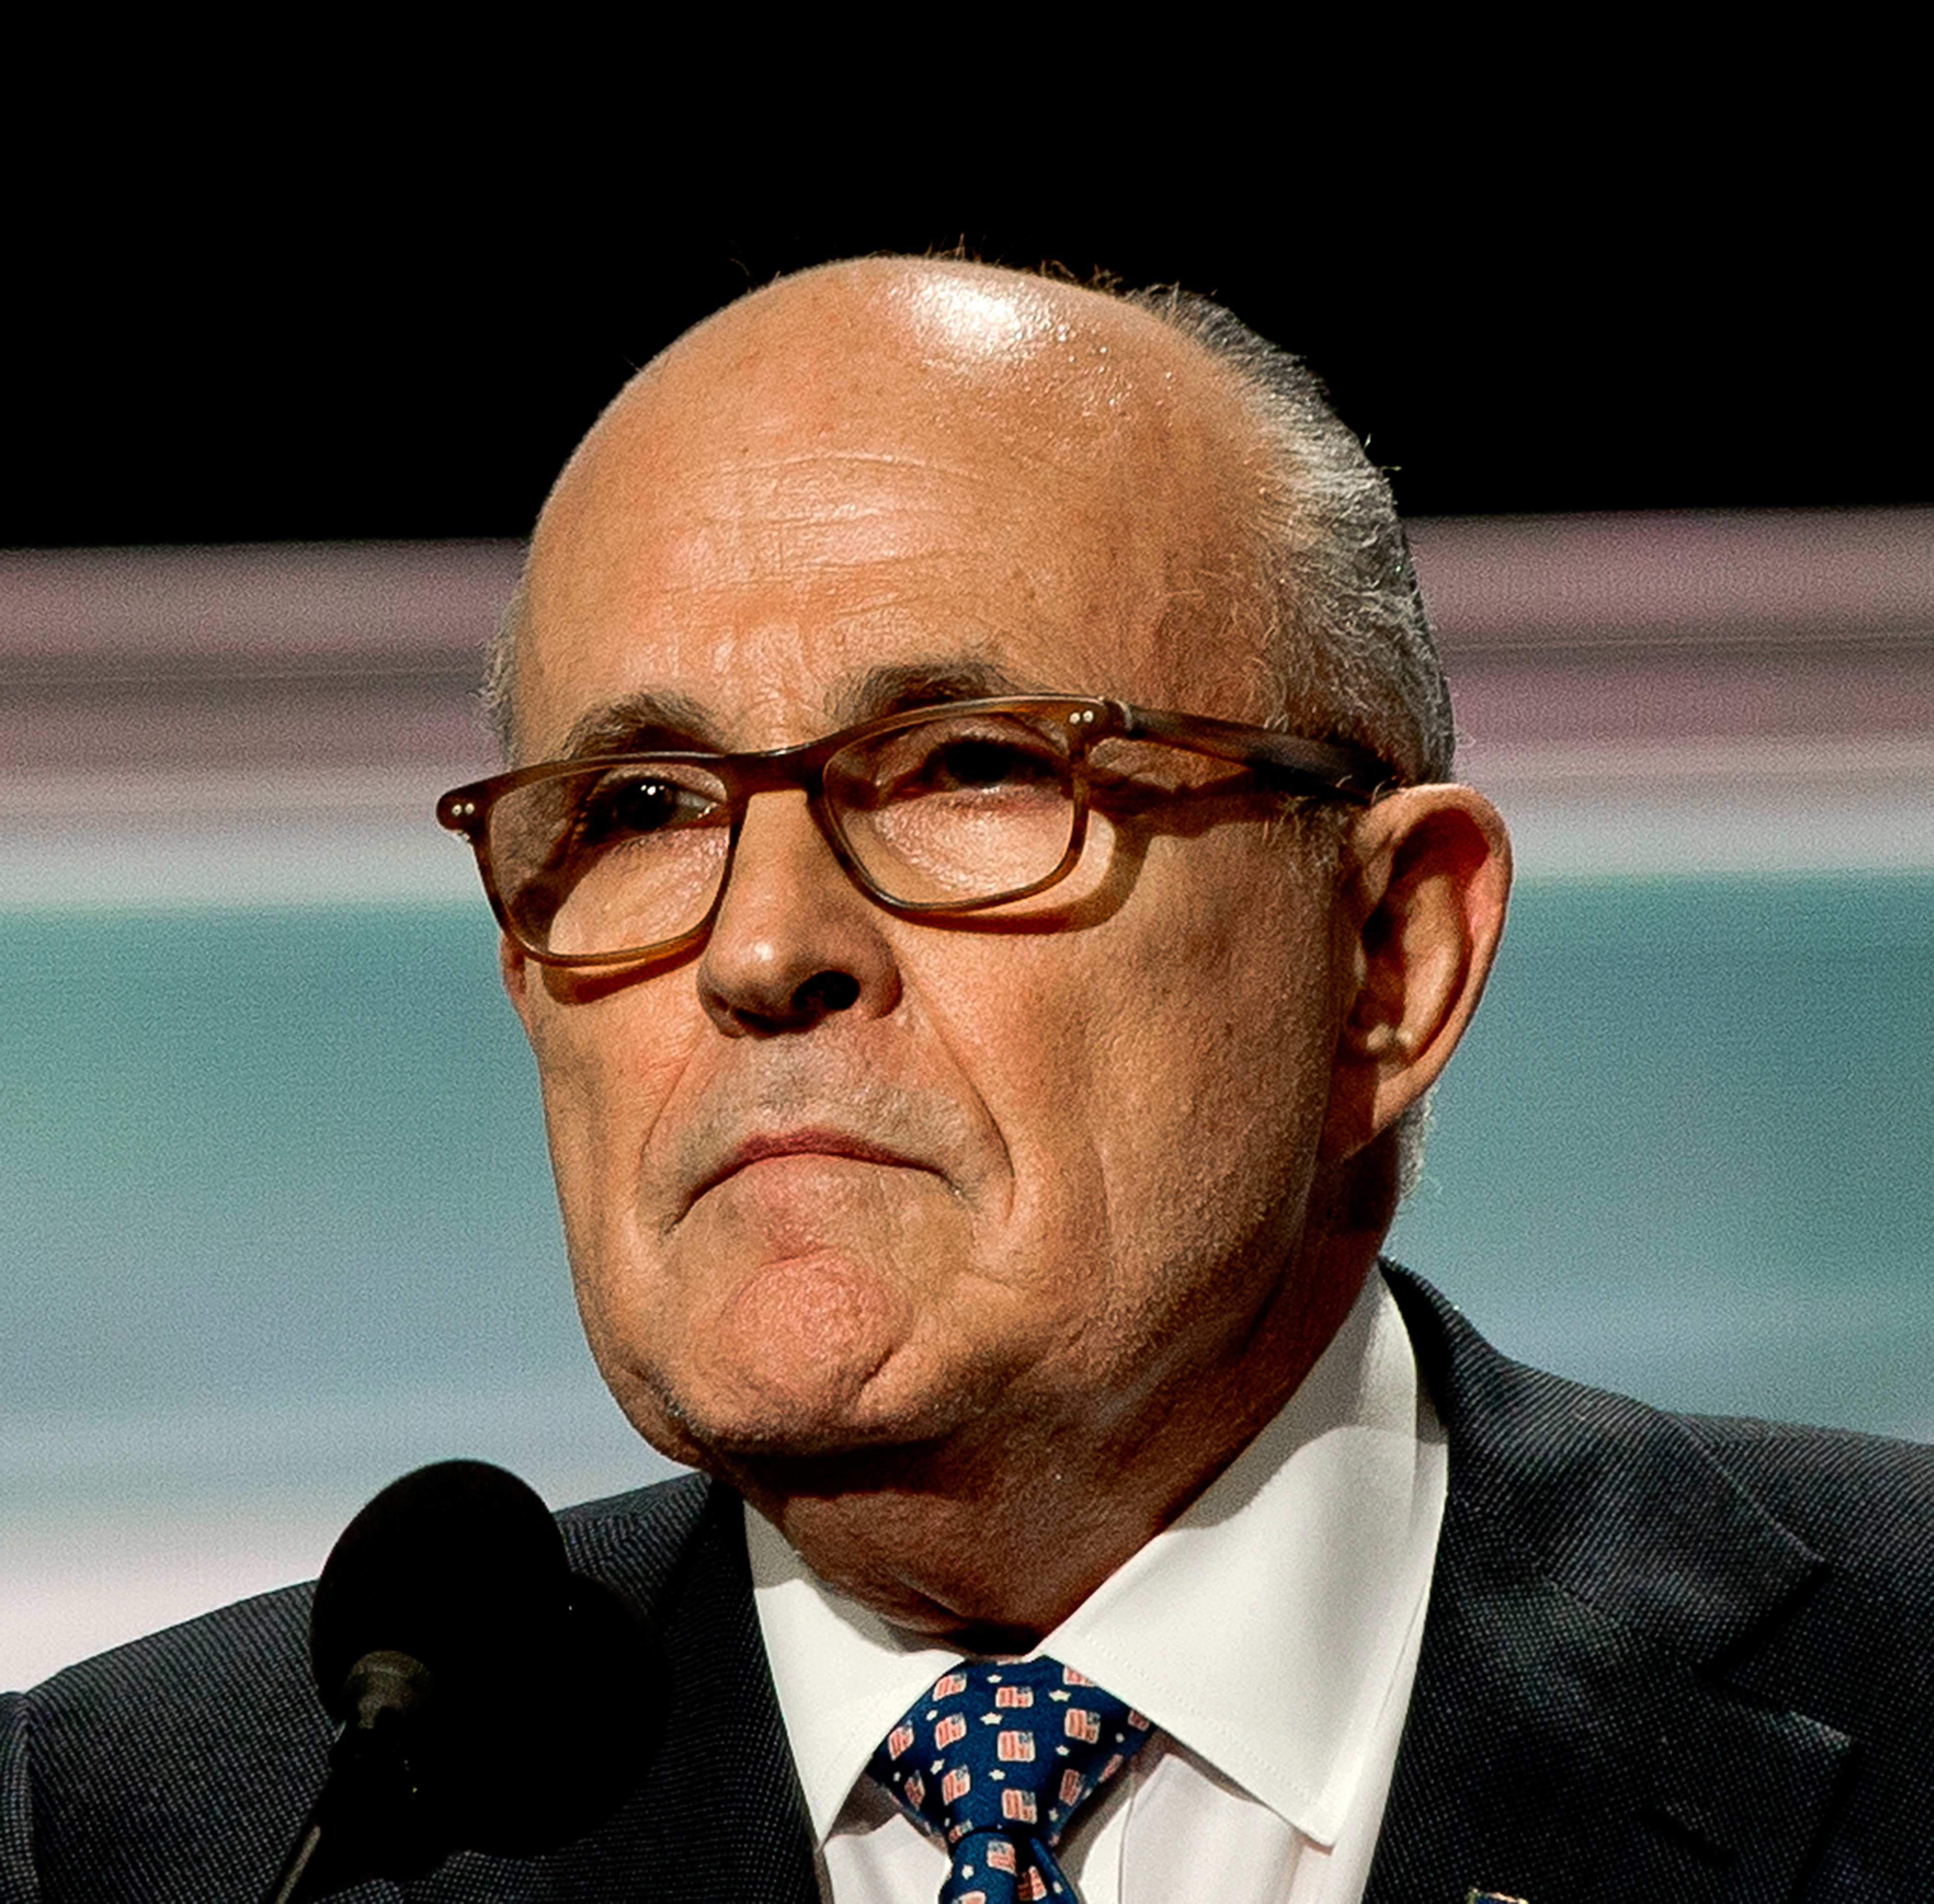 Angry Supermarket Worker Slaps Rudy Giuliani After Roe V Wade Gets Overruled: 'You're Gonna Kill Women'